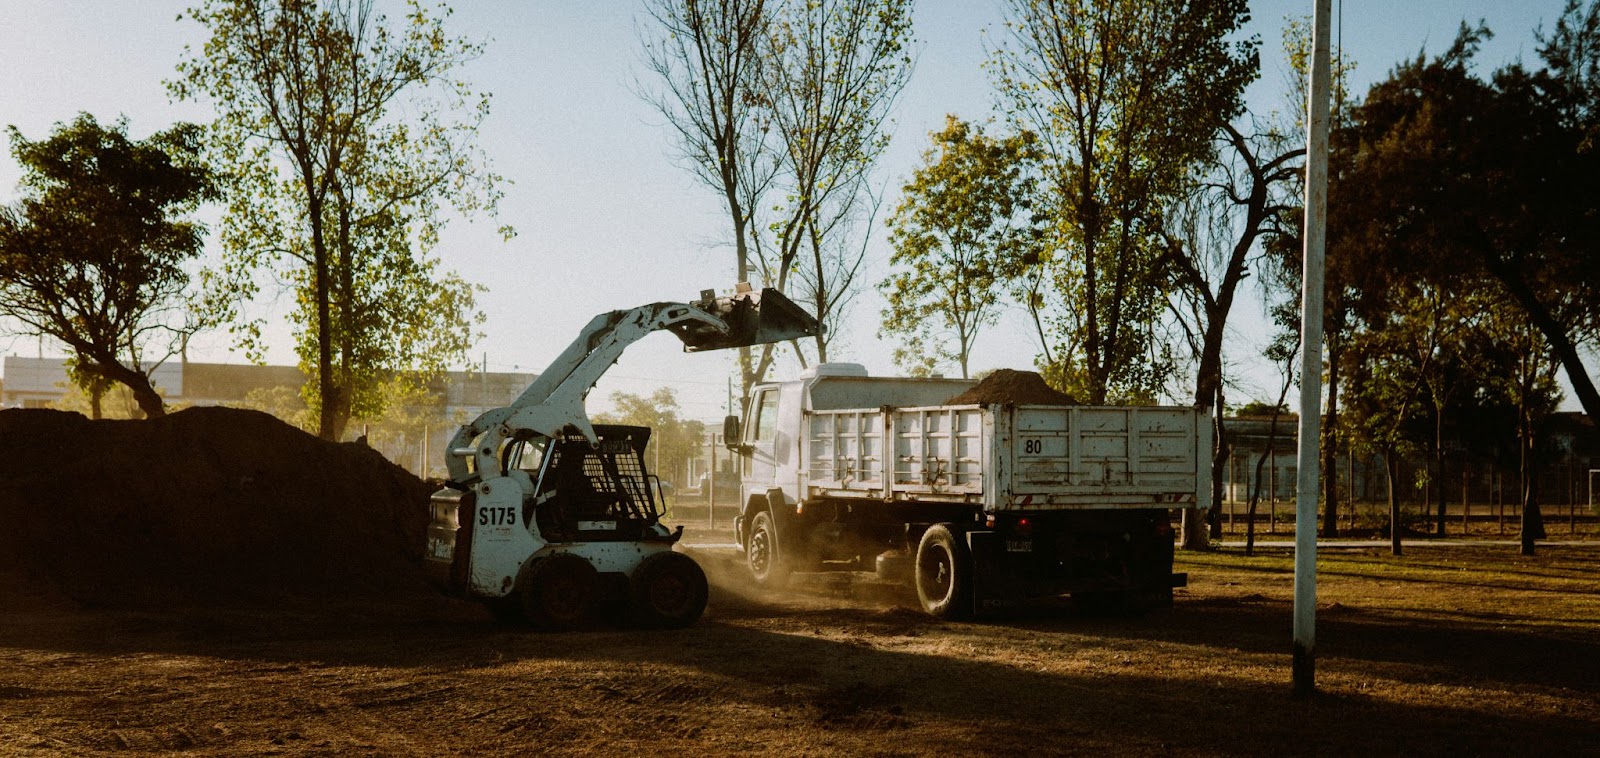 {A skid steer loader loading dirt into a dump truck, showcasing heavy construction equipment in action